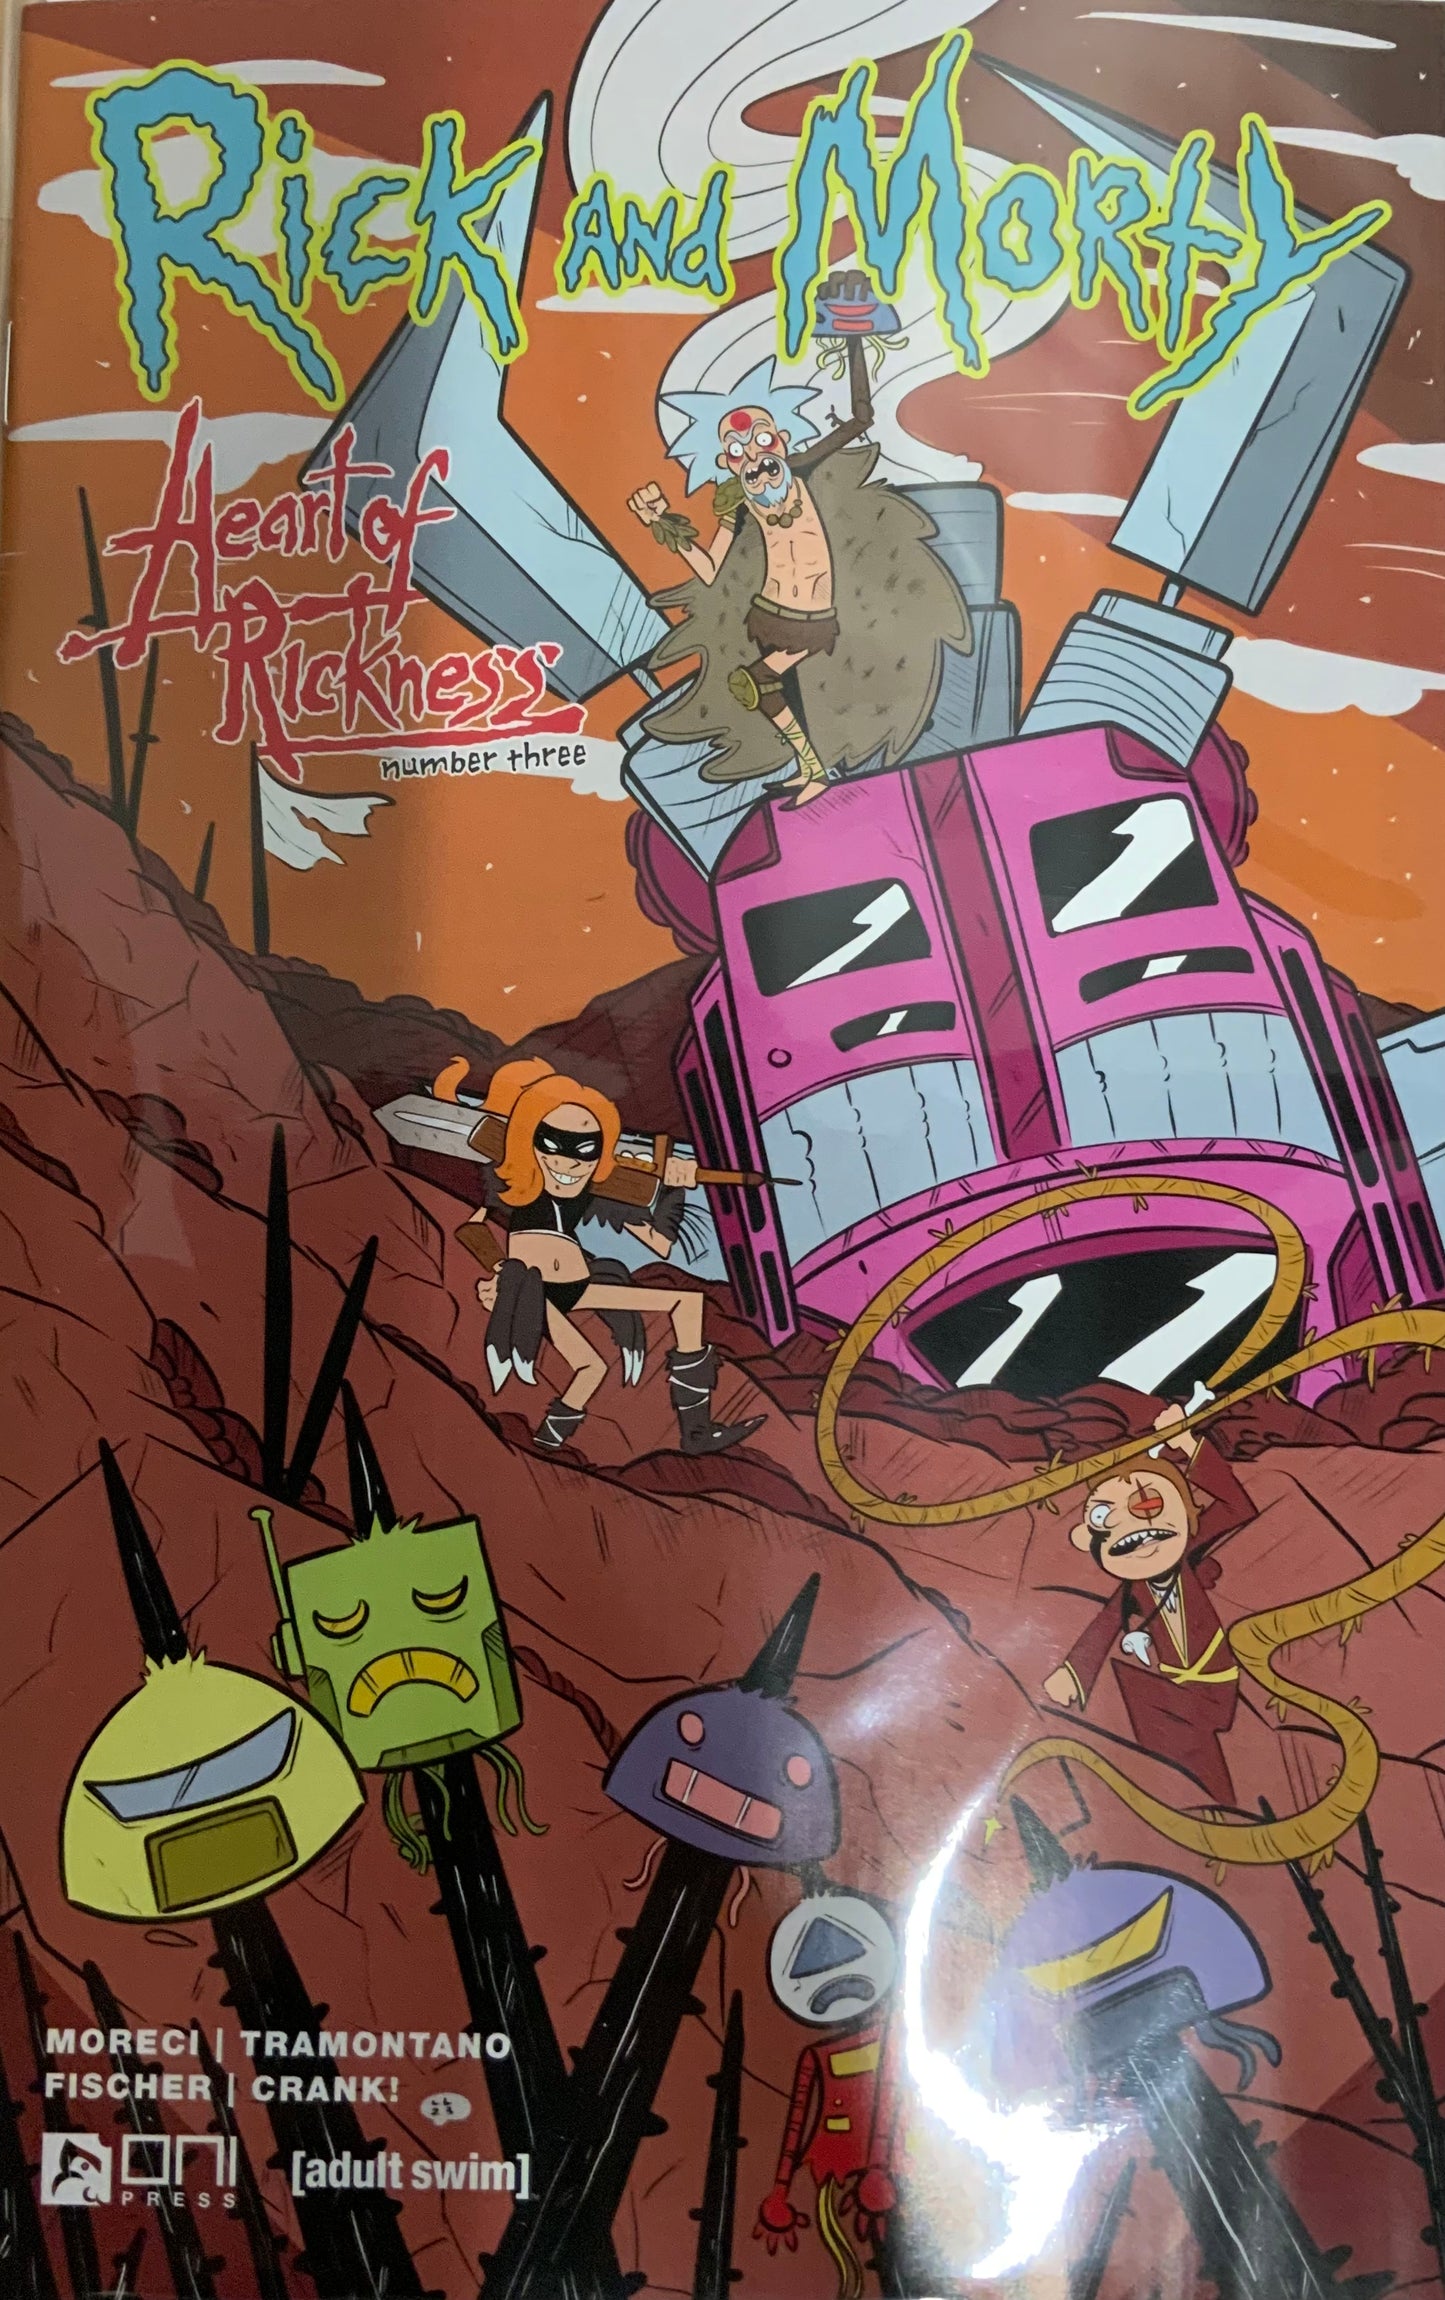 Rick and Morty: Heart of Rickness #3